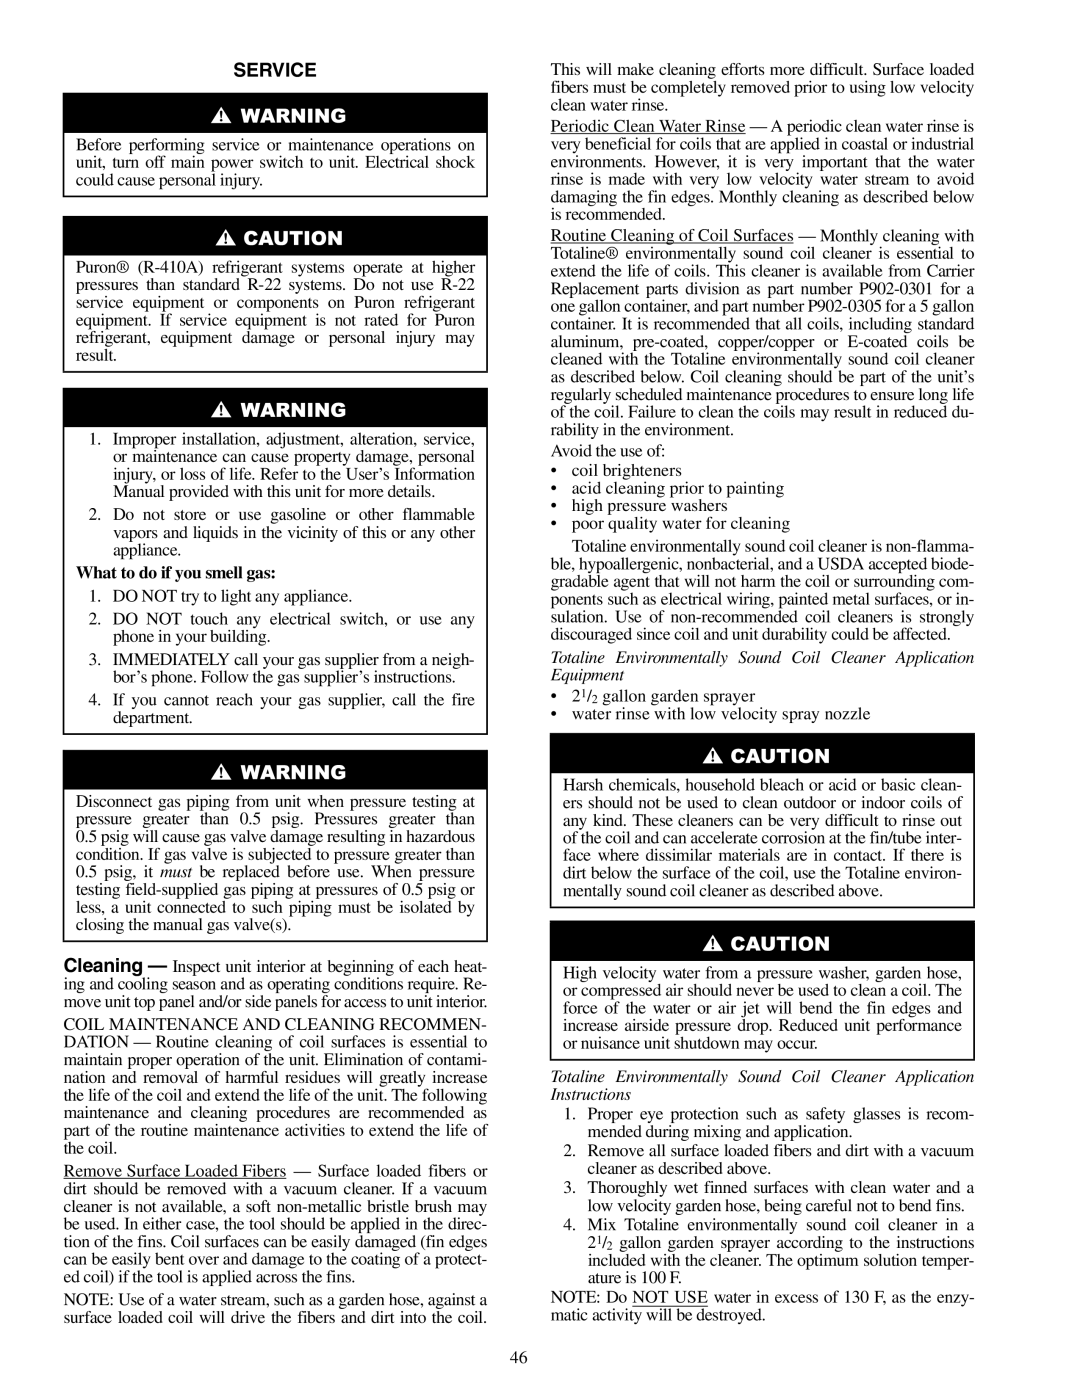 Carrier 48PG20-28 specifications Service, What to do if you smell gas 